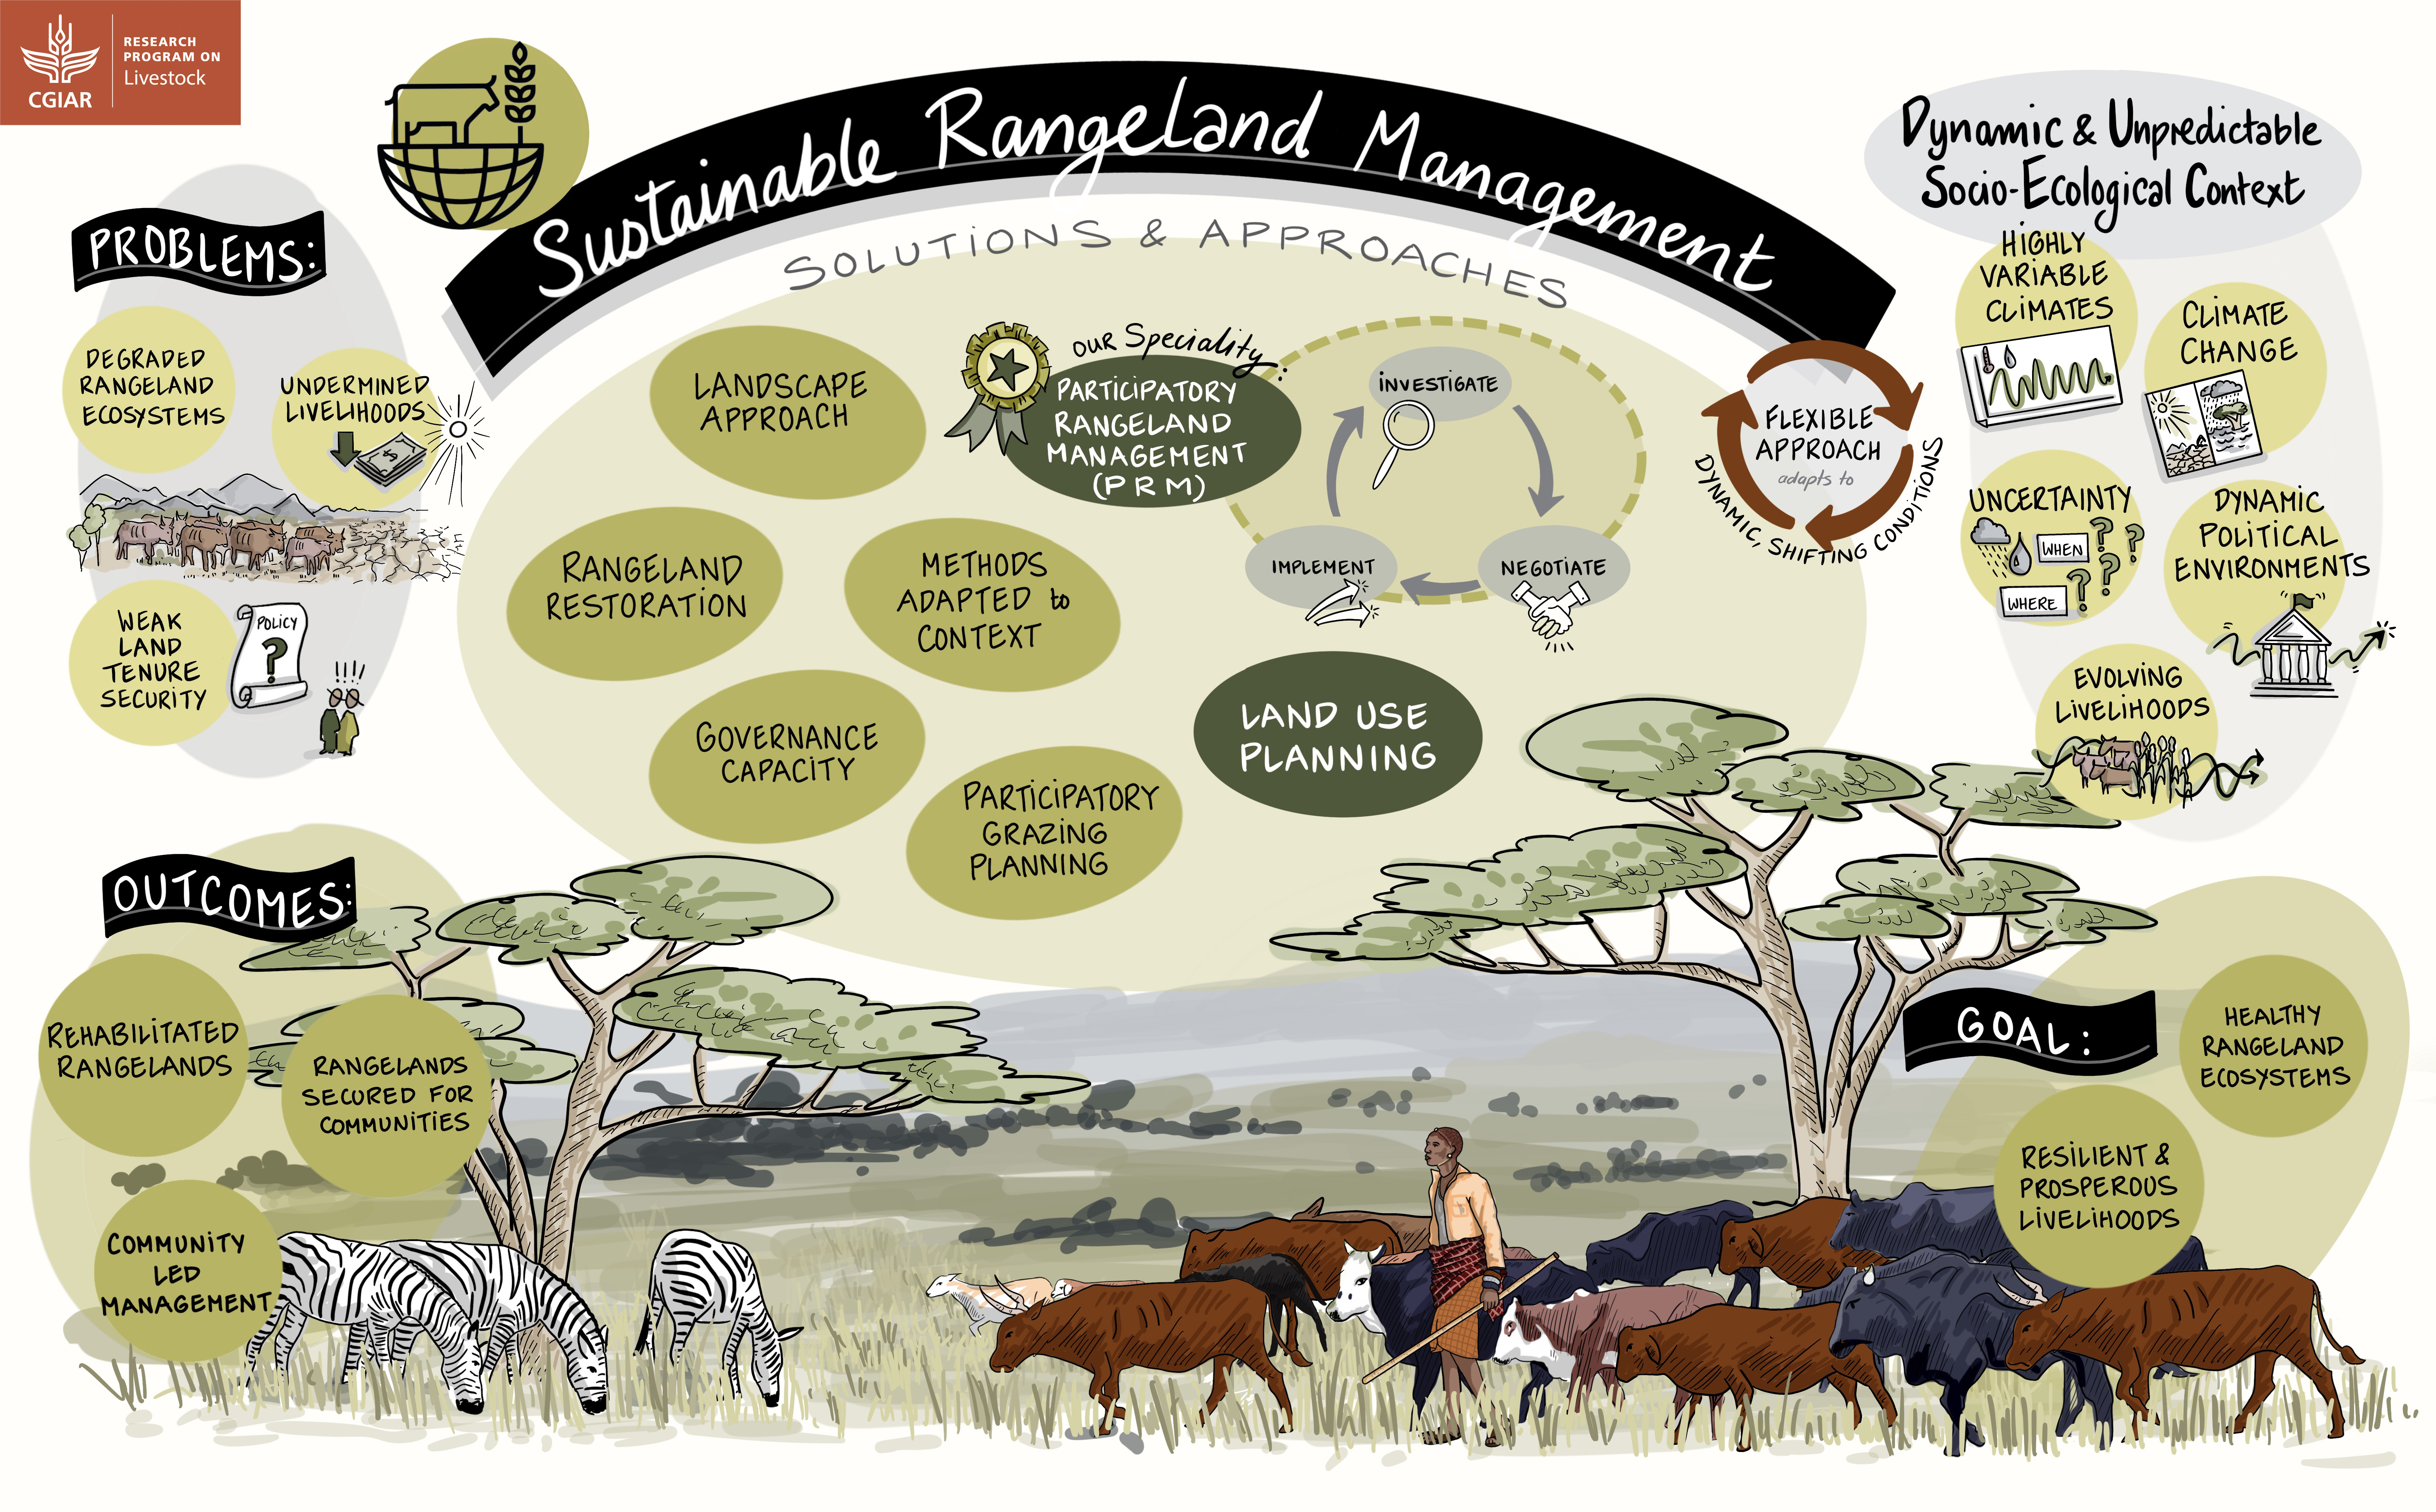 Infographic showing Sustainable Rangeland Management - solutions and approaches